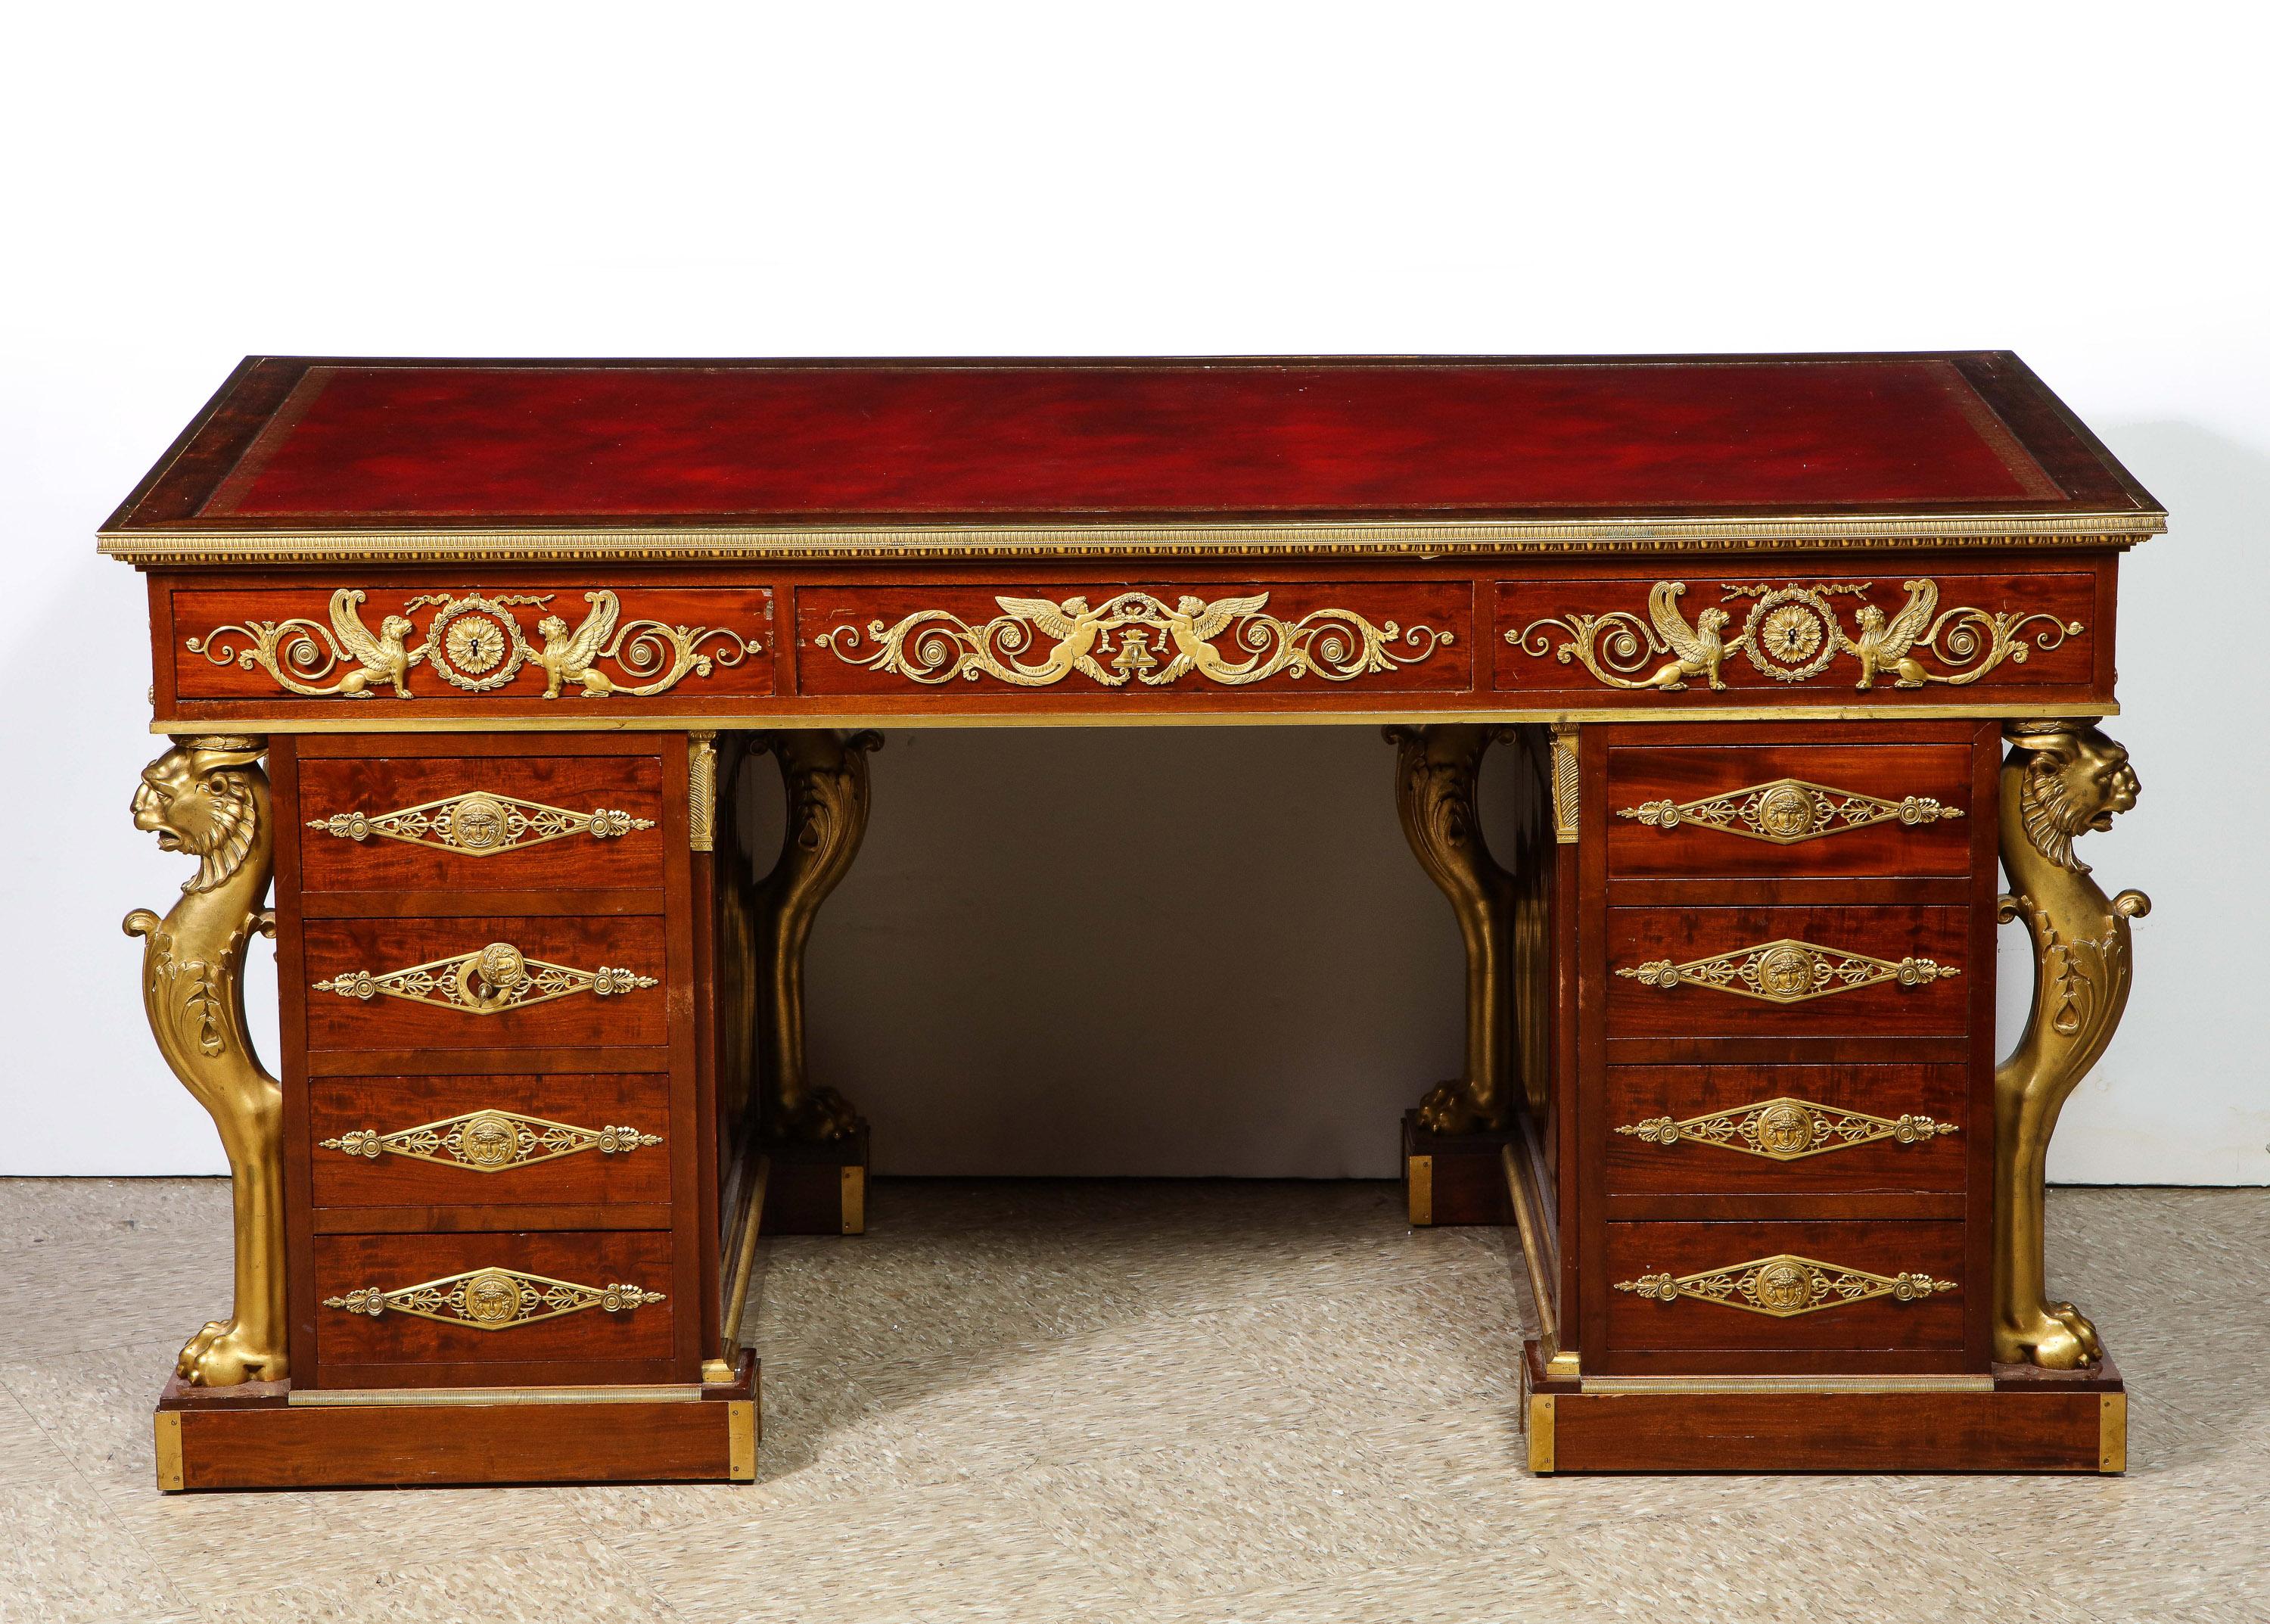 Alexandre Chevrie, a museum quality French ormolu mounted mahogany Royal Executive 